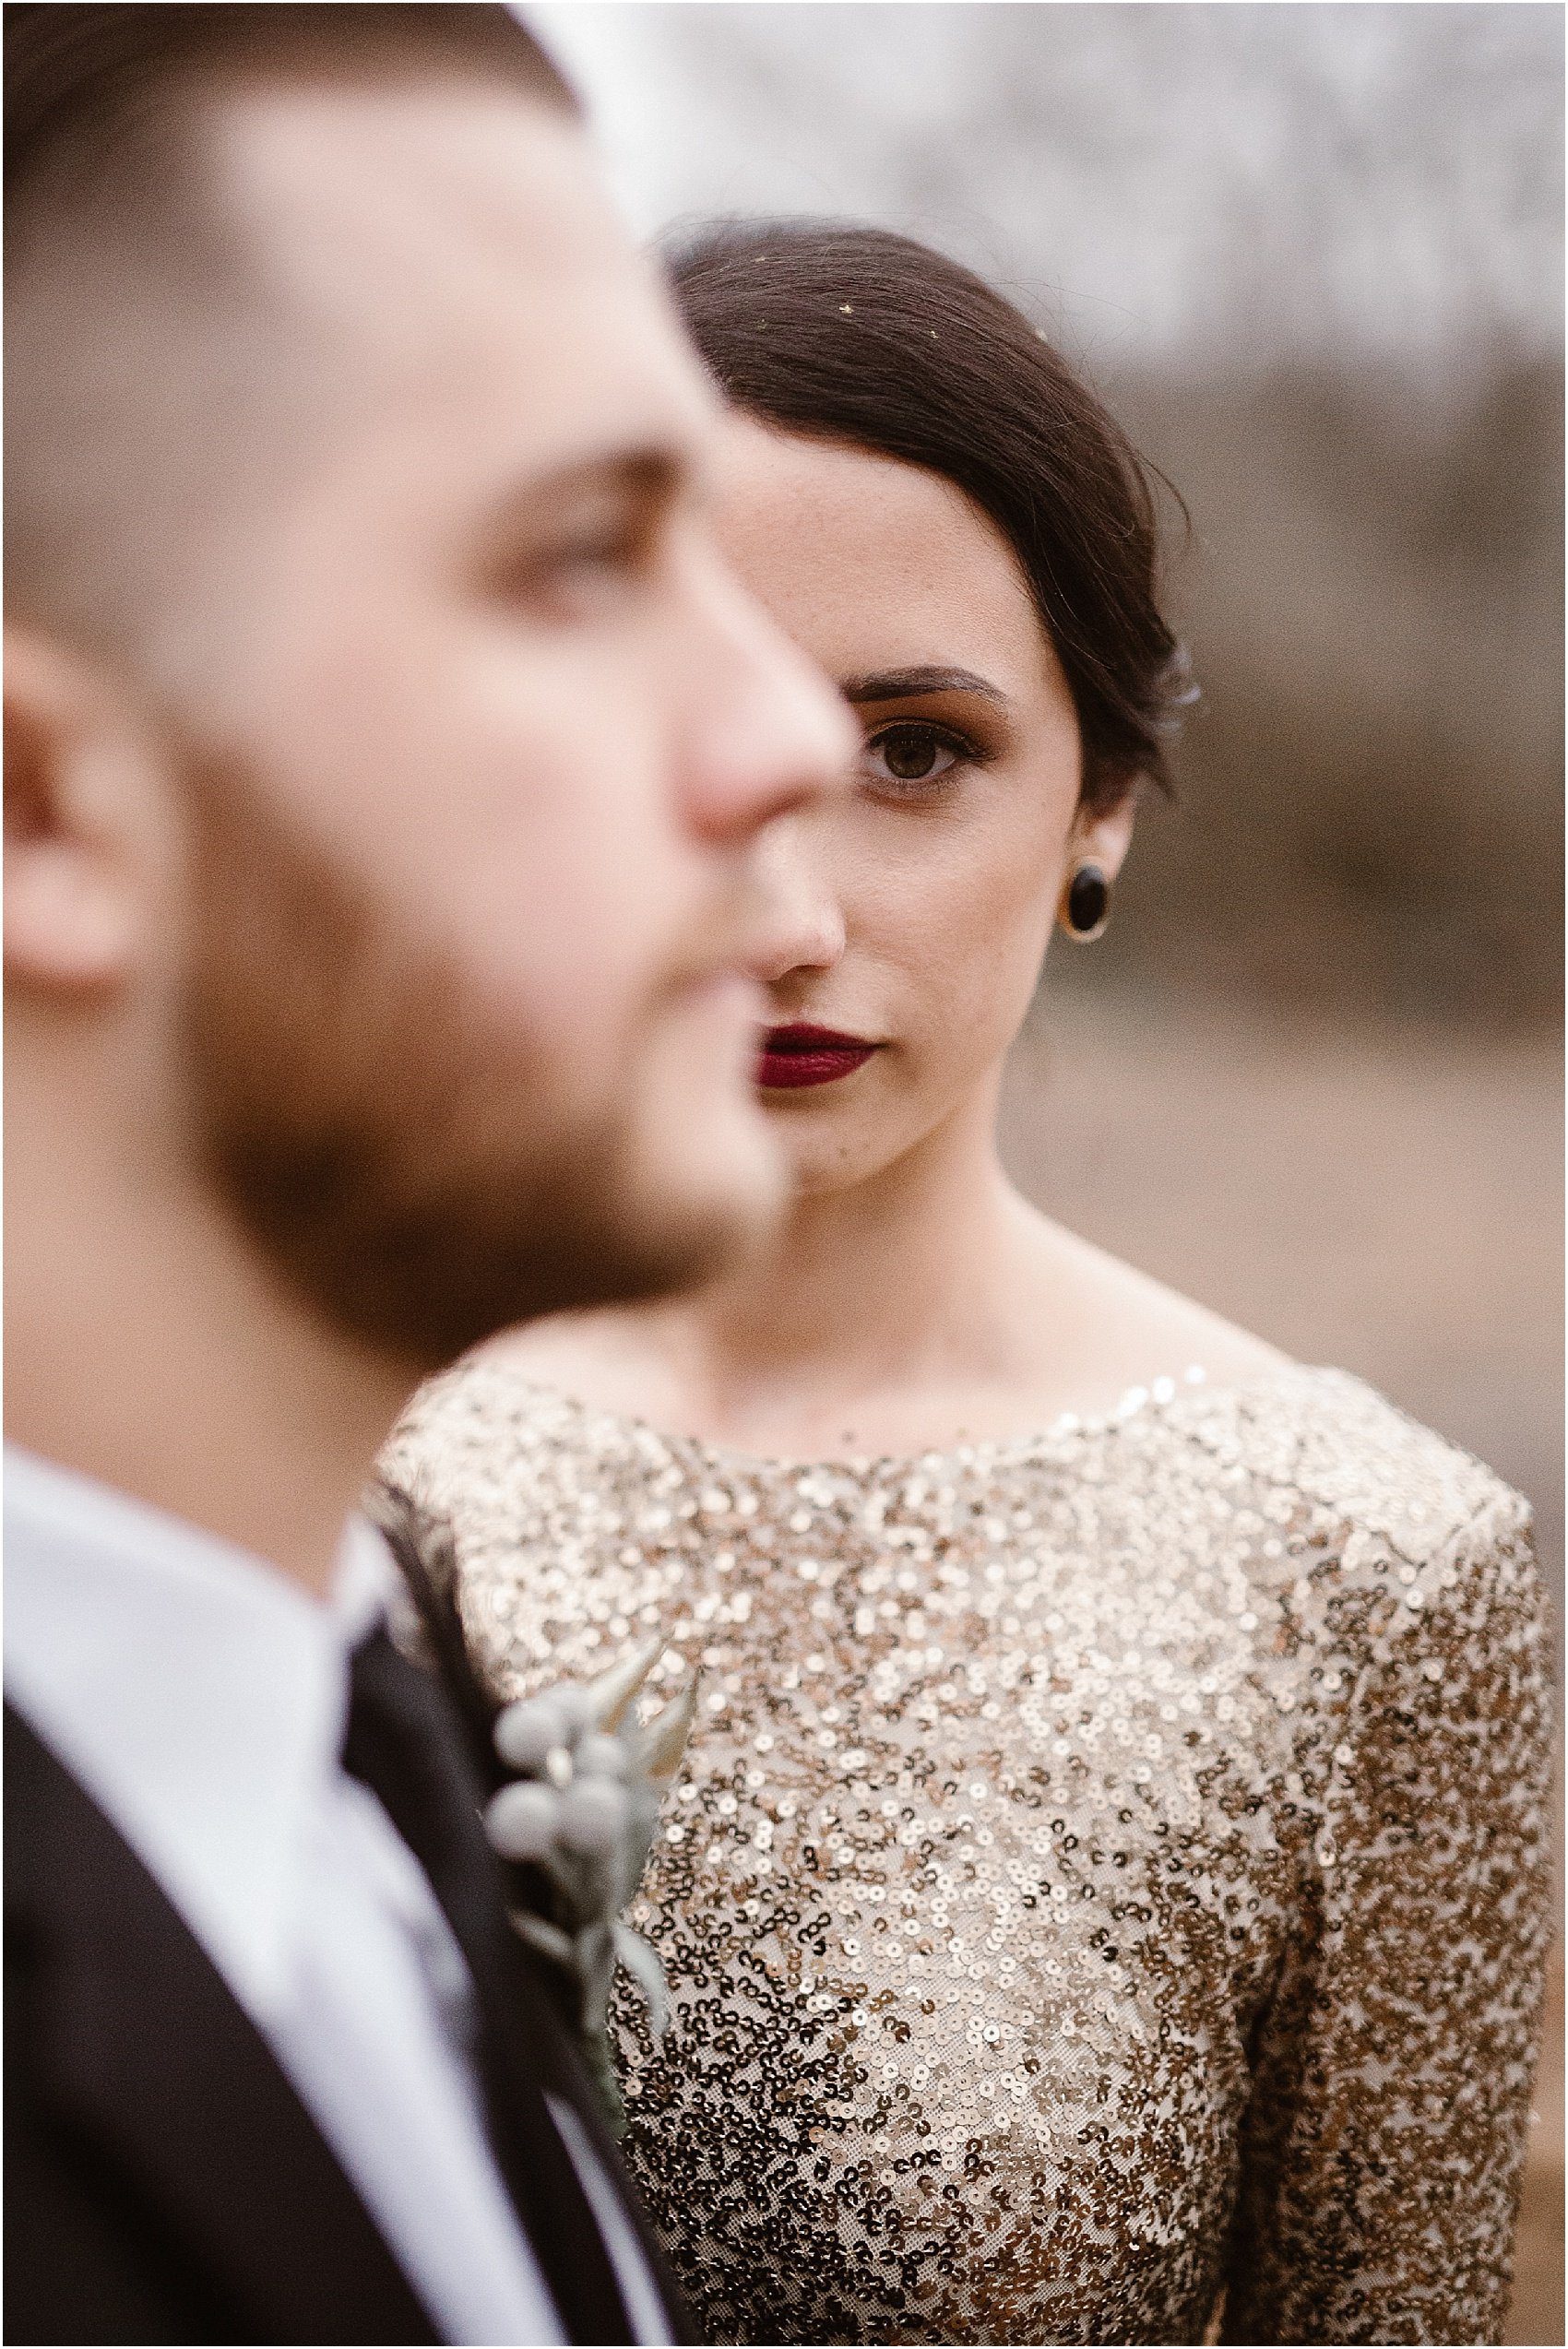 woman stands behind man wearing black earrings and gold wedding dress